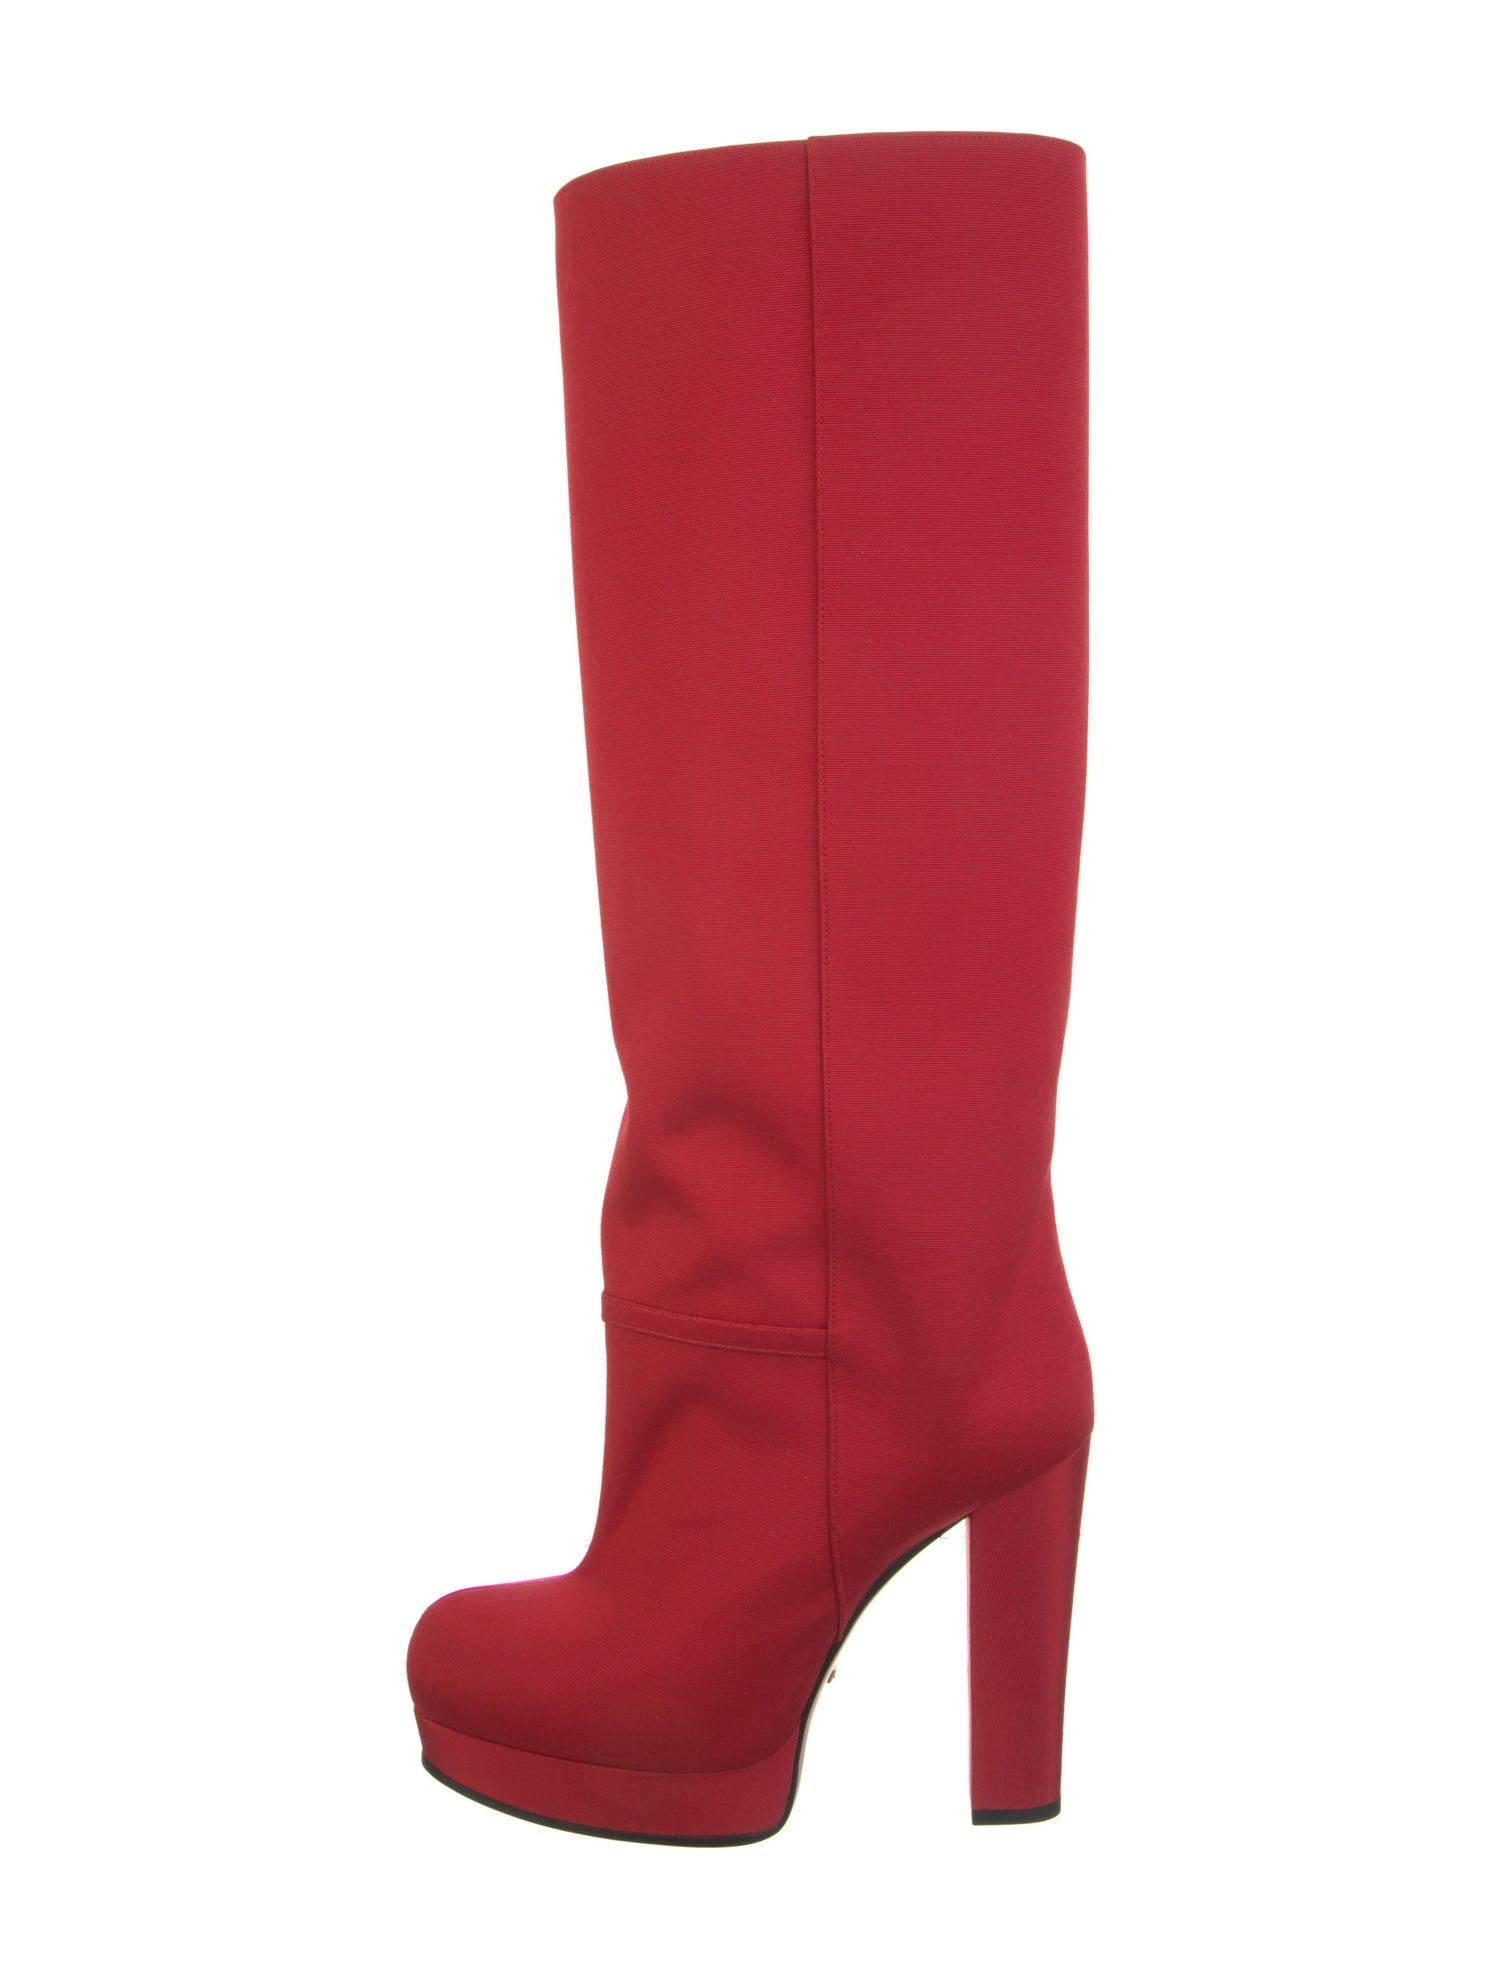 New With Box Gucci Fall 2019 Alessandro Michele Red Boots Sz 38.5 For Sale 3